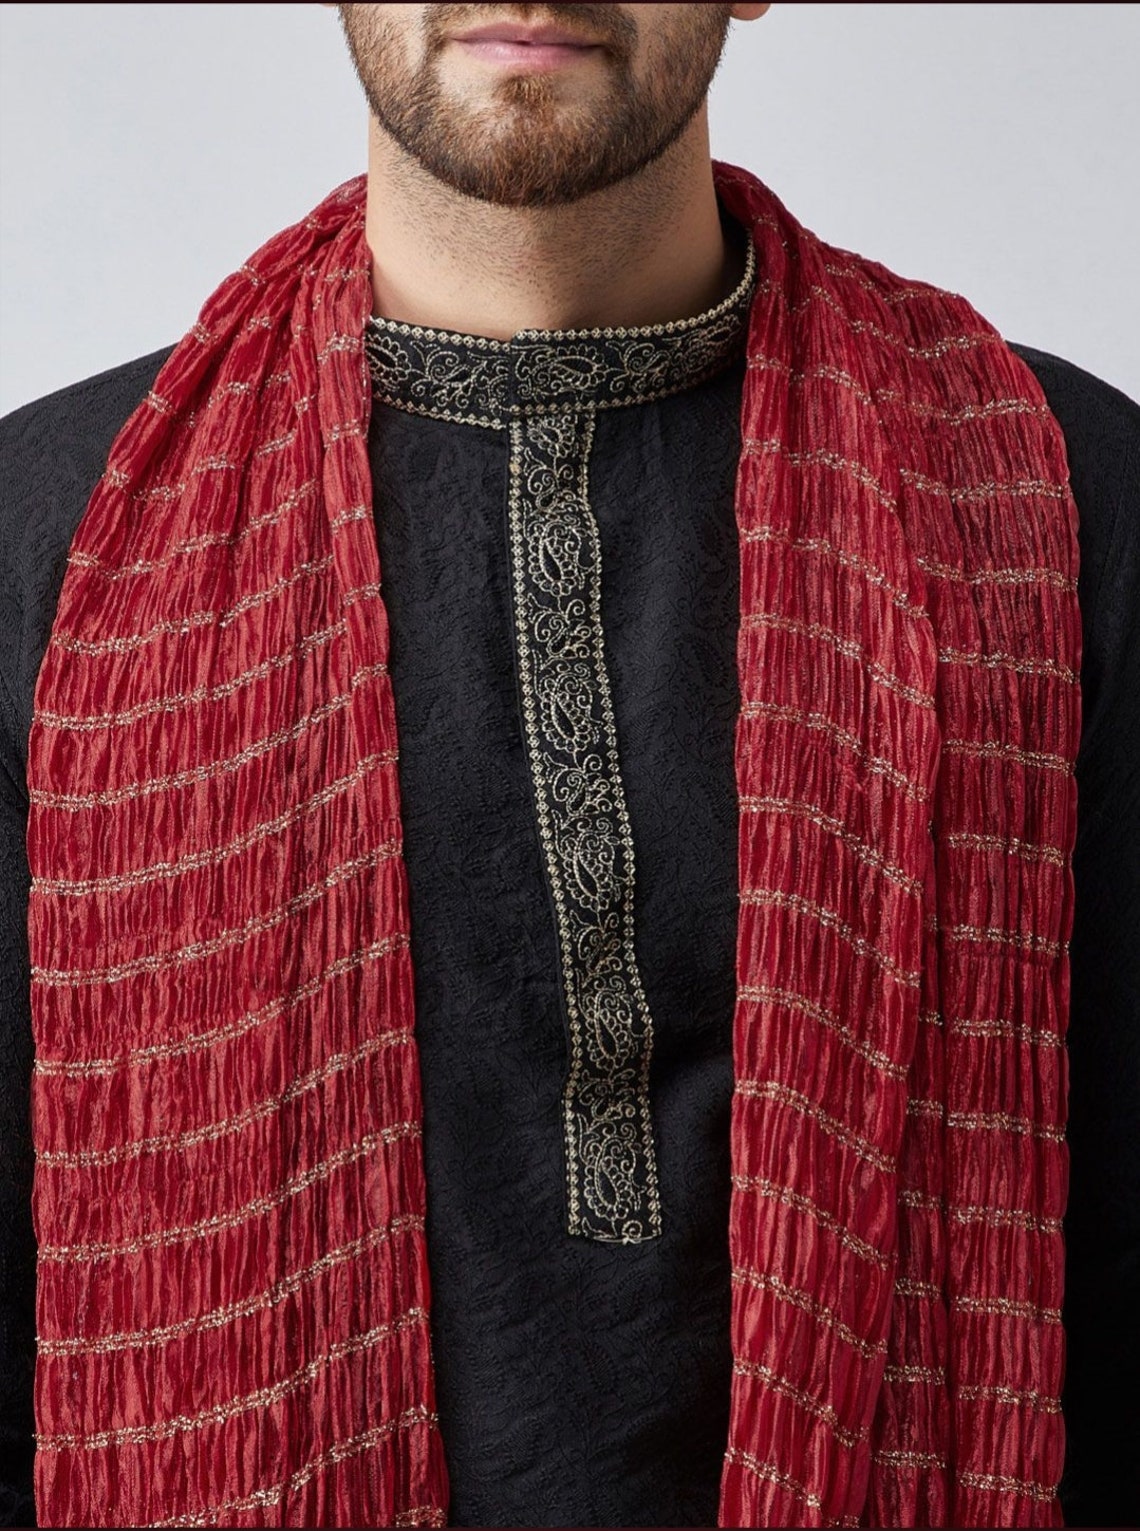 Dupatta Stole for Men- Maroon Indian Clothing in Denver, CO, Aurora, CO, Boulder, CO, Fort Collins, CO, Colorado Springs, CO, Parker, CO, Highlands Ranch, CO, Cherry Creek, CO, Centennial, CO, and Longmont, CO. NATIONWIDE SHIPPING USA- India Fashion X